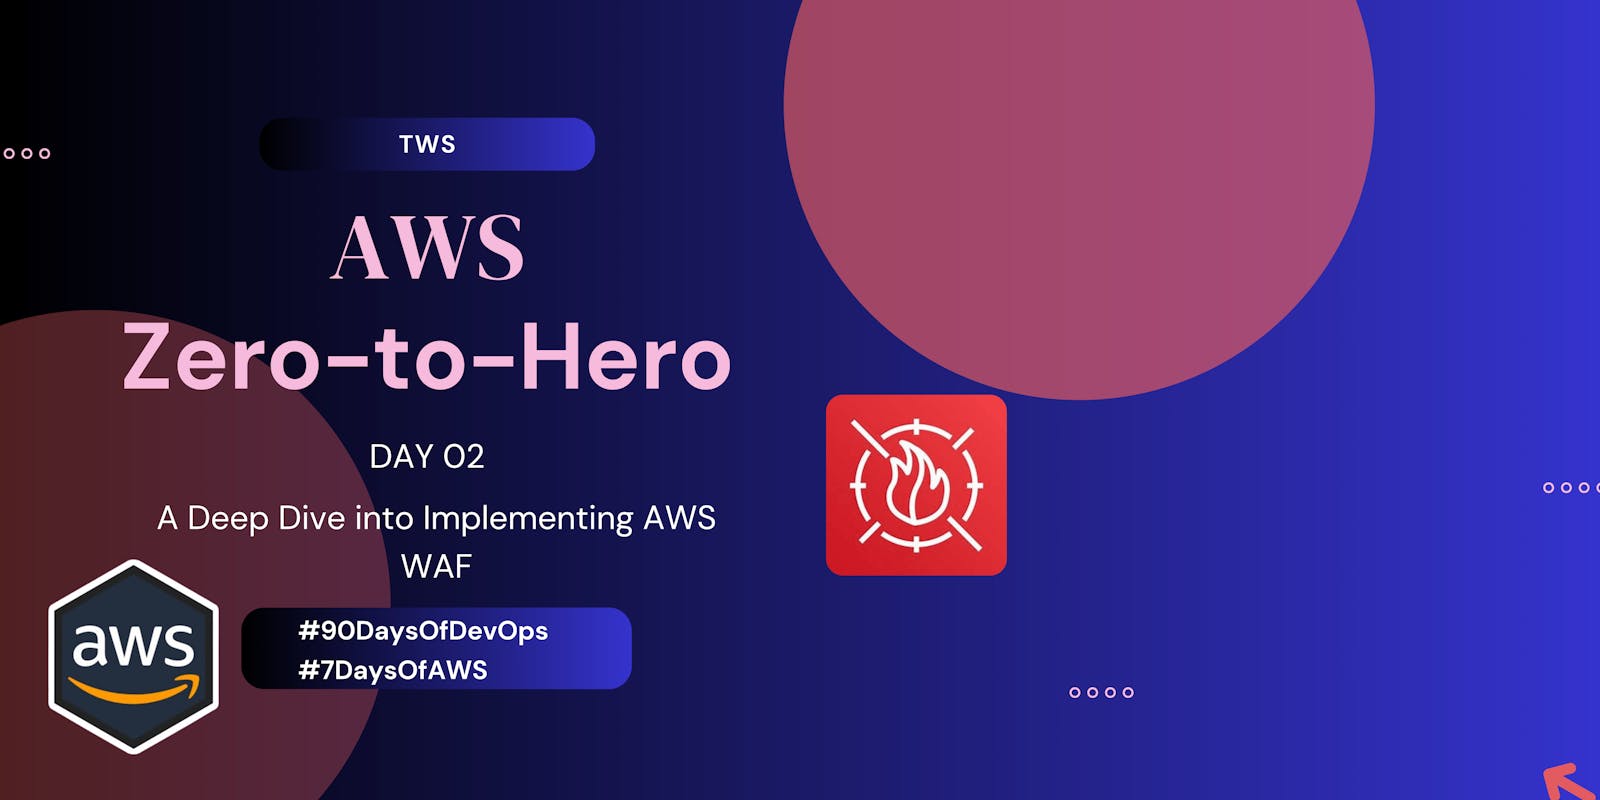 Day 2: A Deep Dive into Implementing AWS WAF for Unrivaled Web Application Security, Auto-Scaling and load balancing: